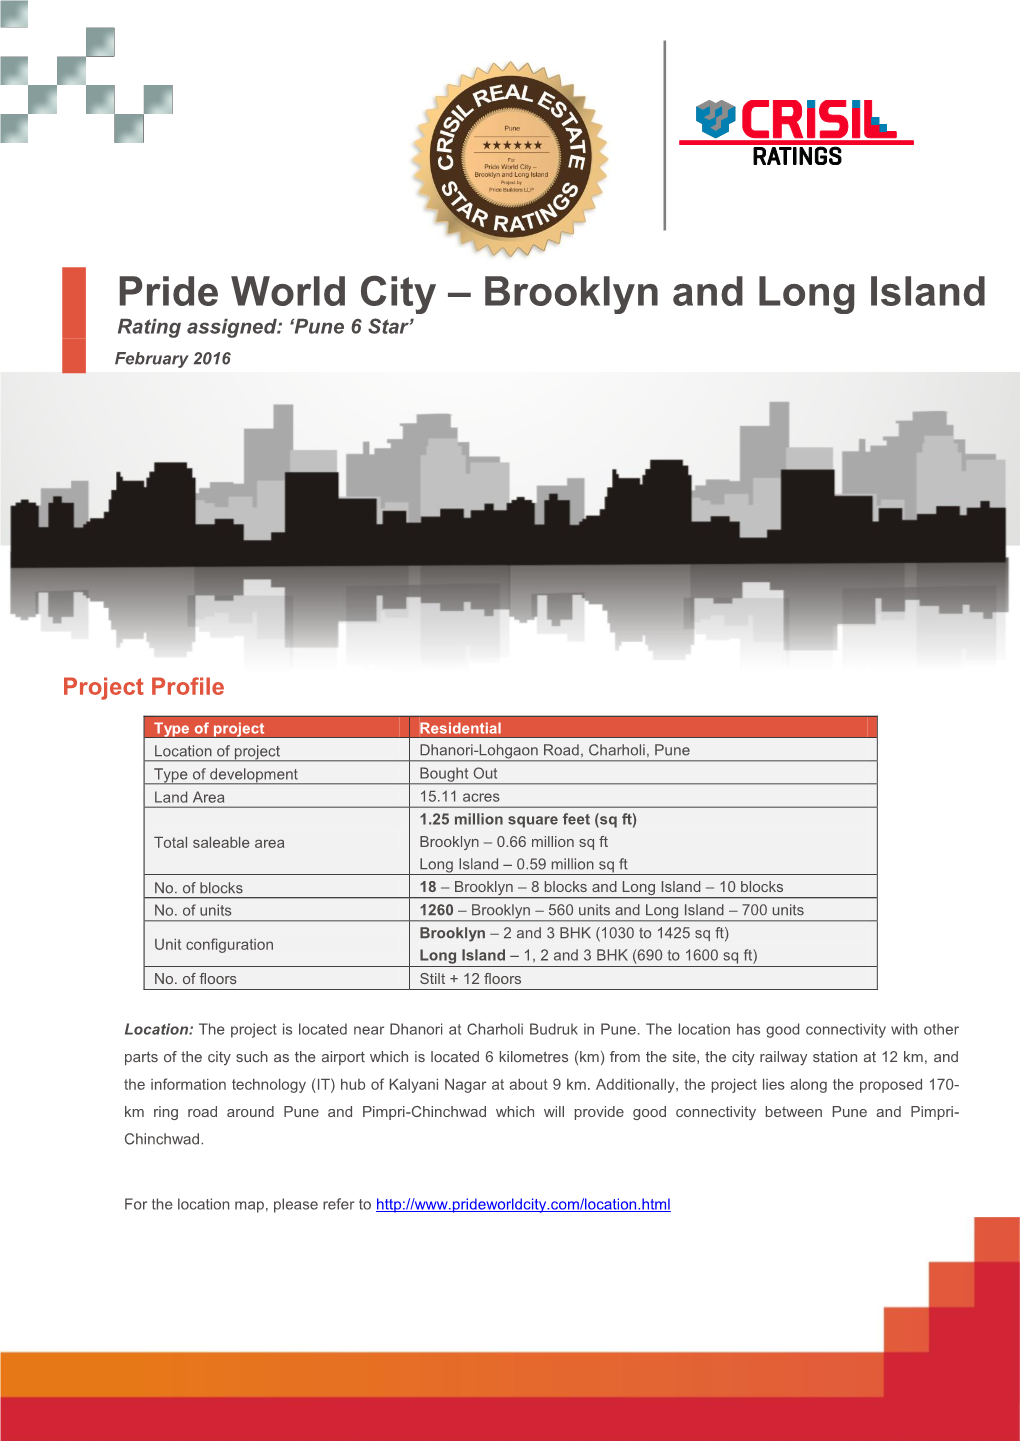 Pride World City – Brooklyn and Long Island Rating Assigned: ‘Pune 6 Star’